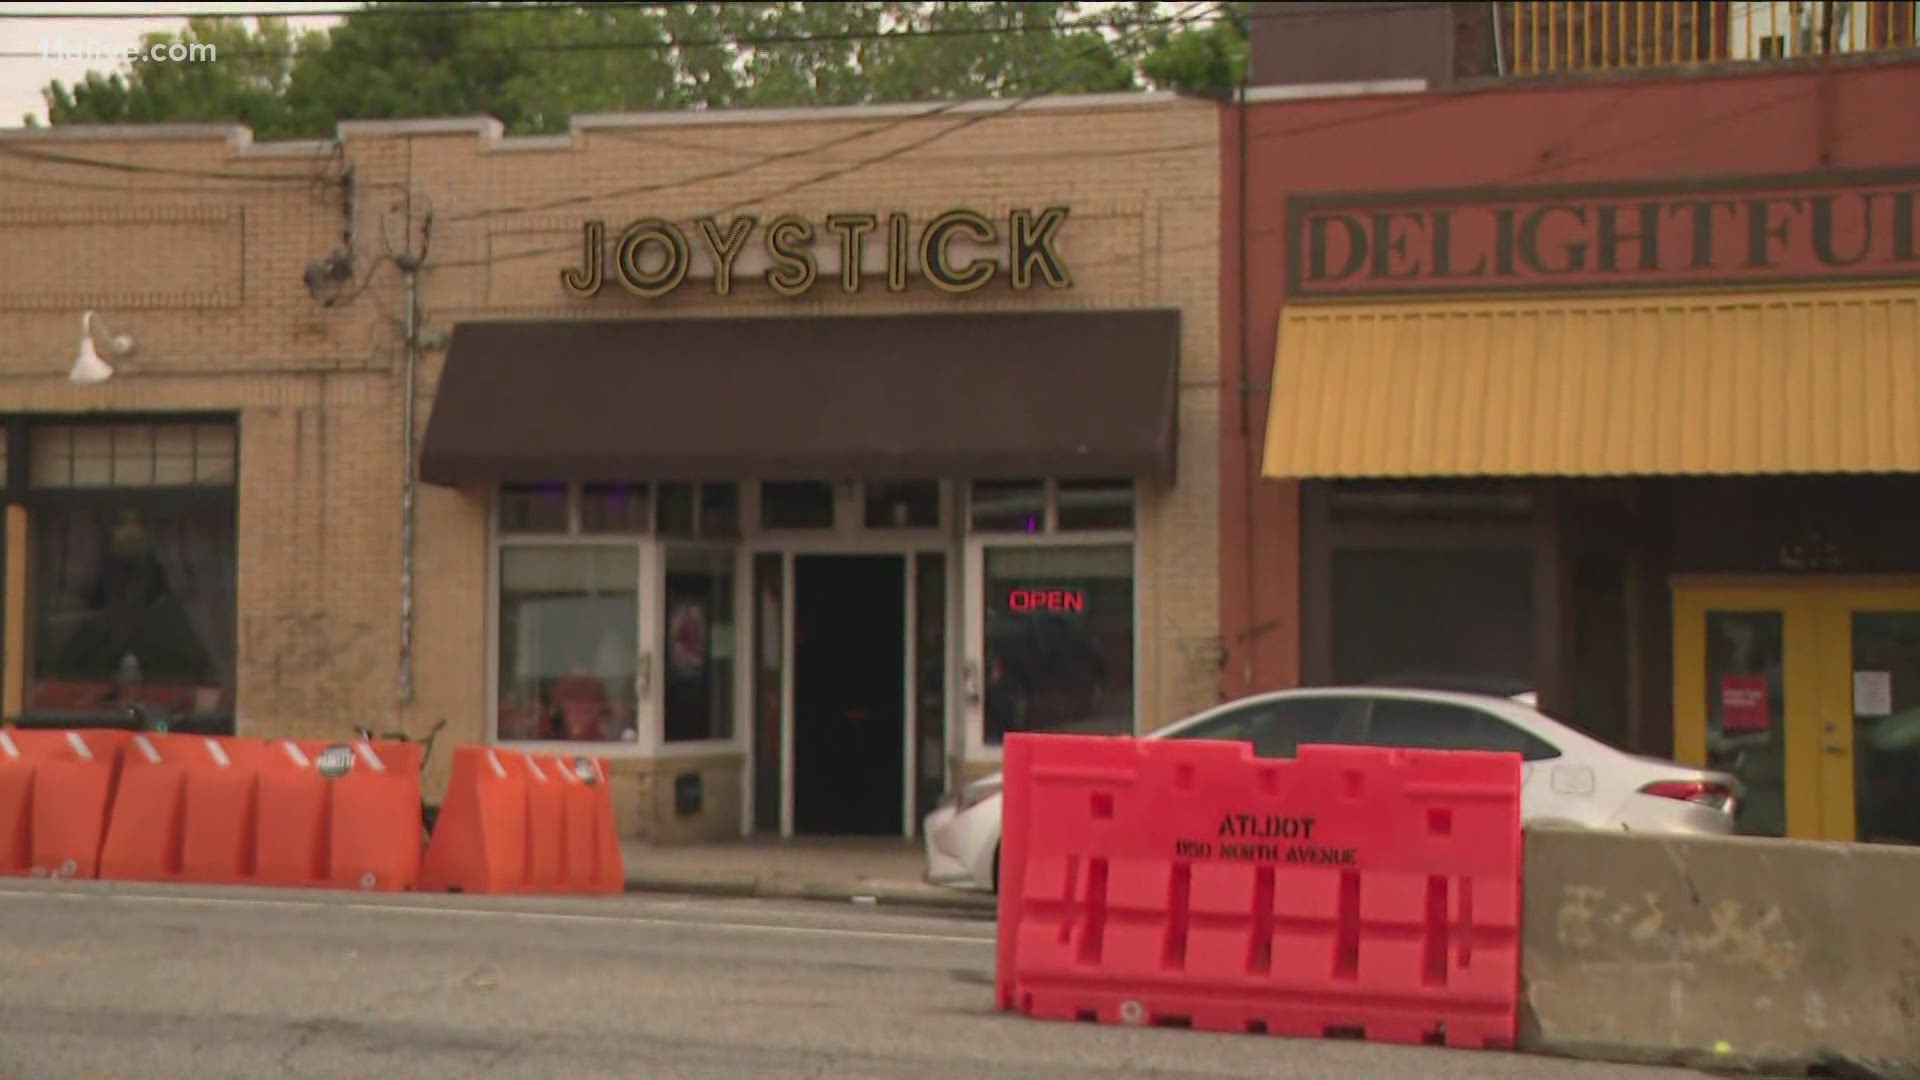 Many businesses that stayed closed for most of the last year are starting to reopen.